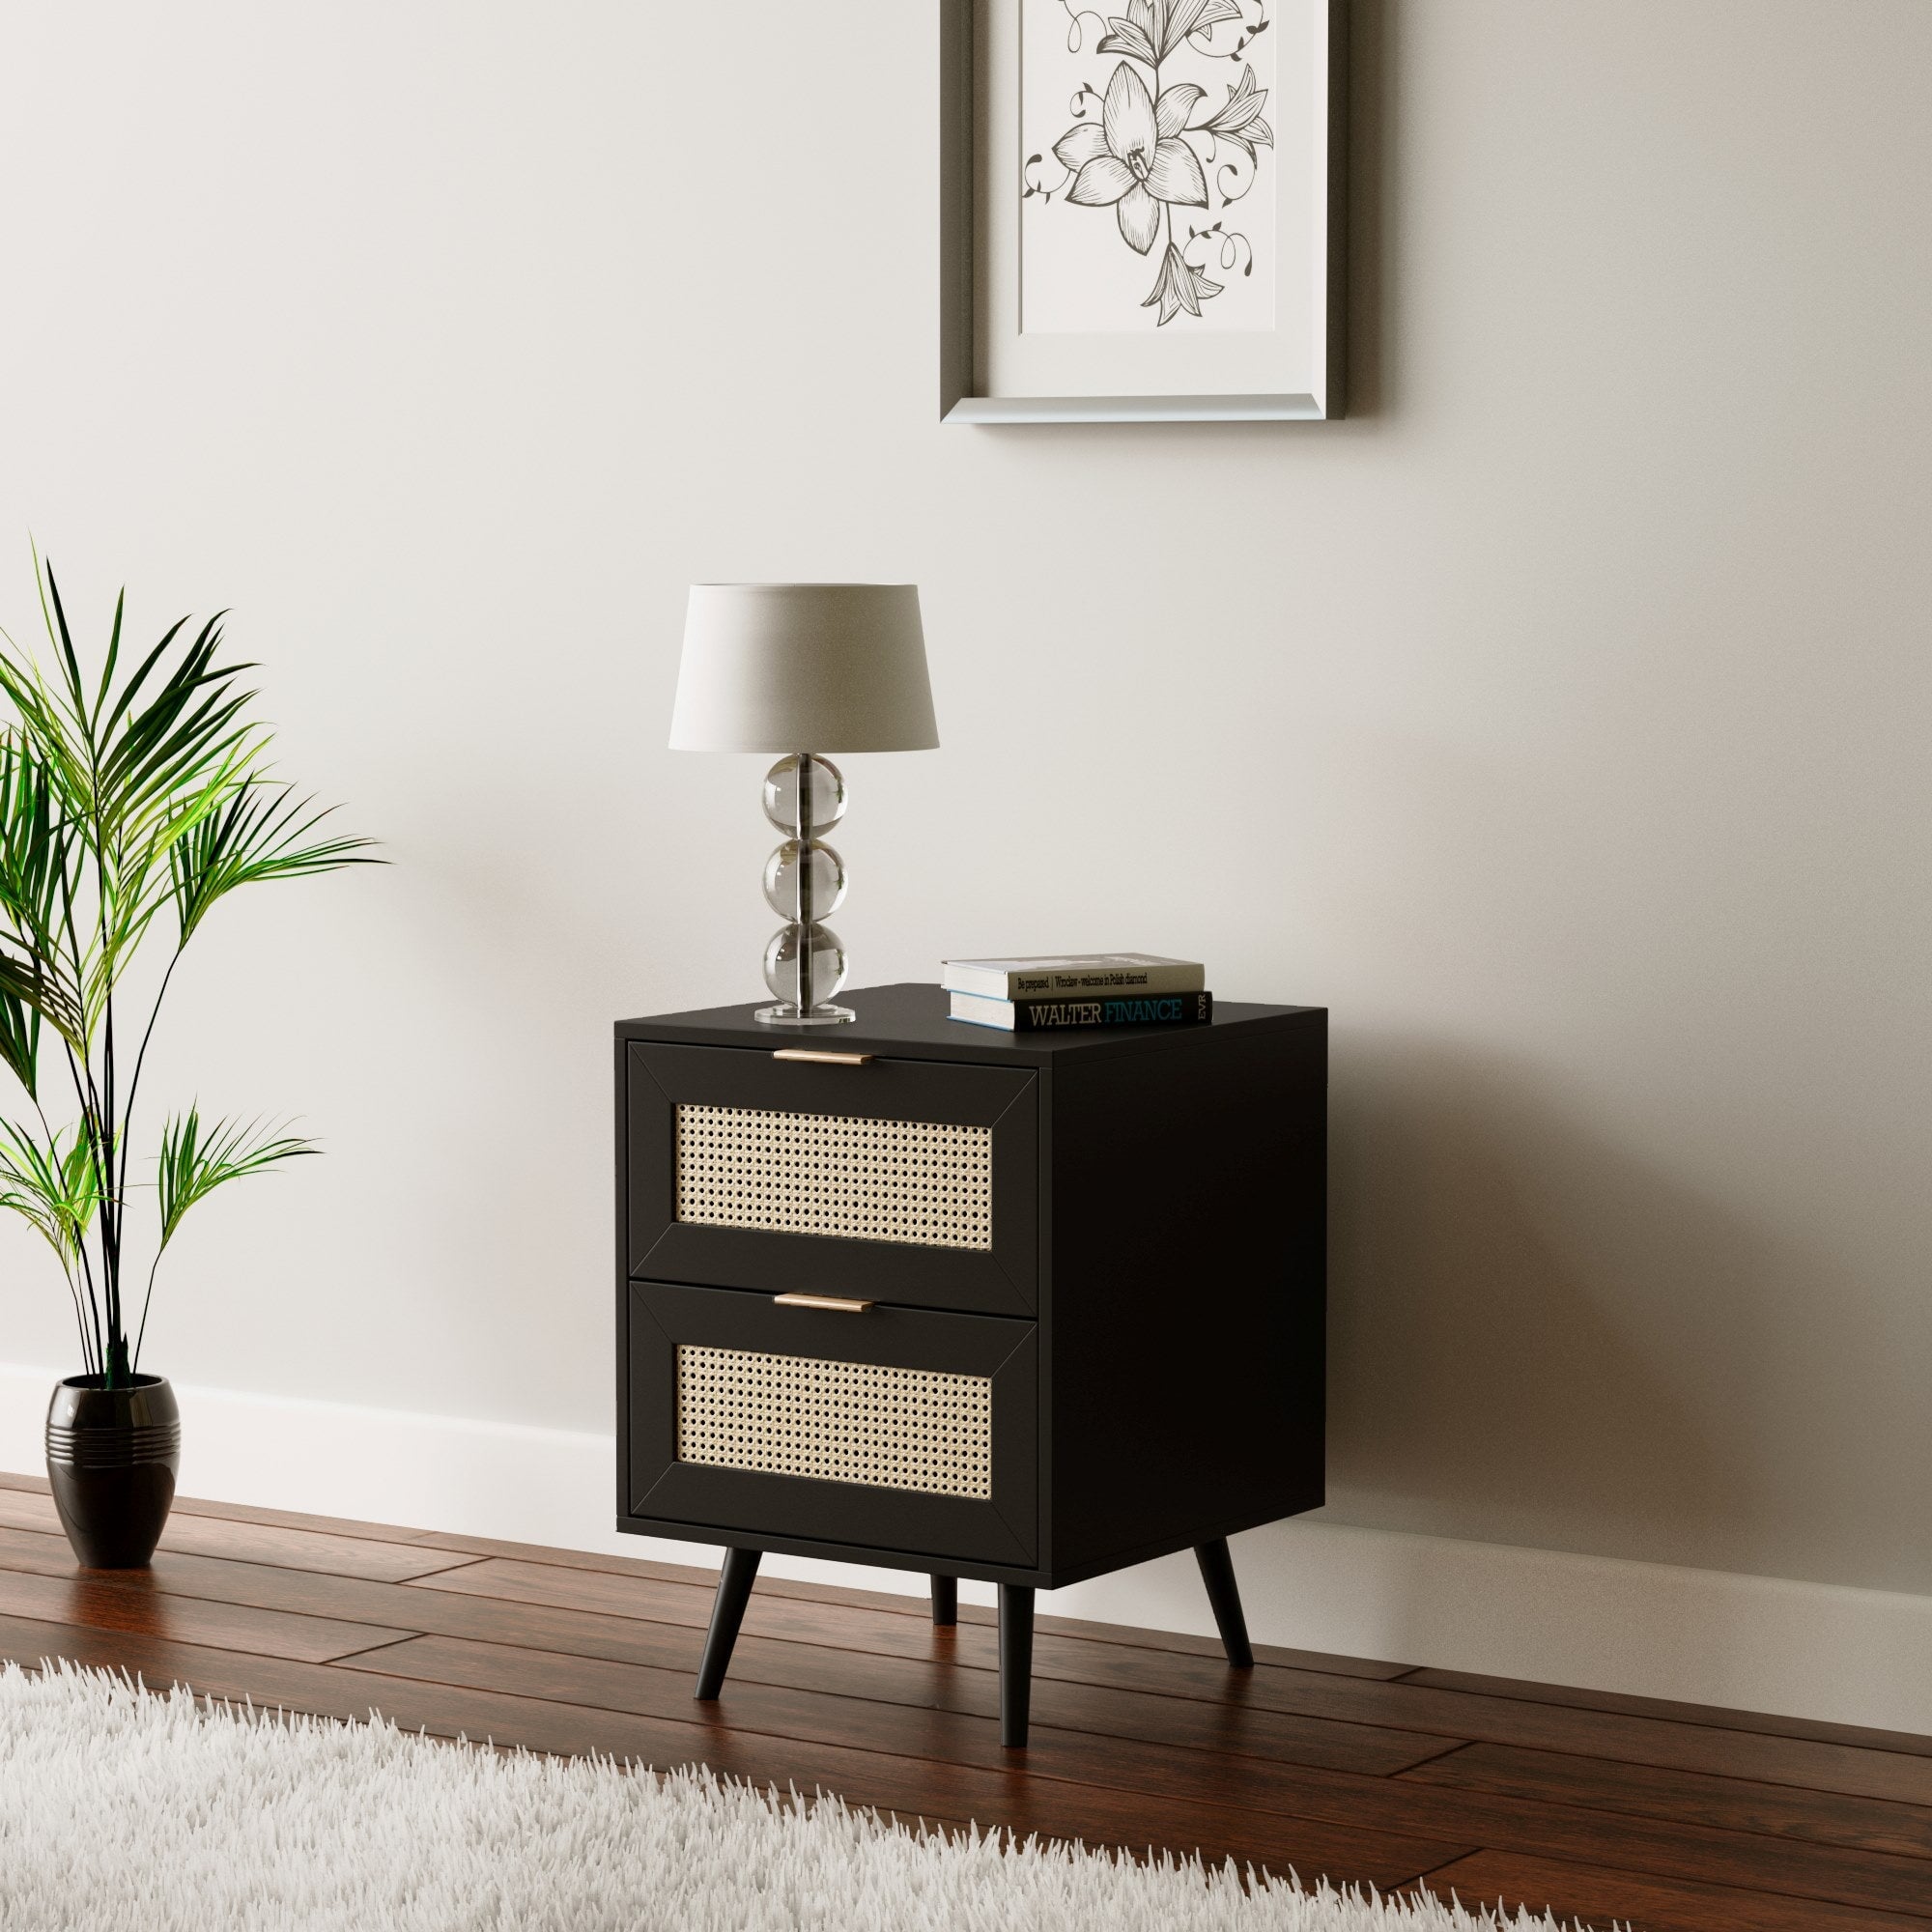 Rian 2 Drawer Bedside Cabinet Table - Black With Natural Cane Front Casa Maria Designs 